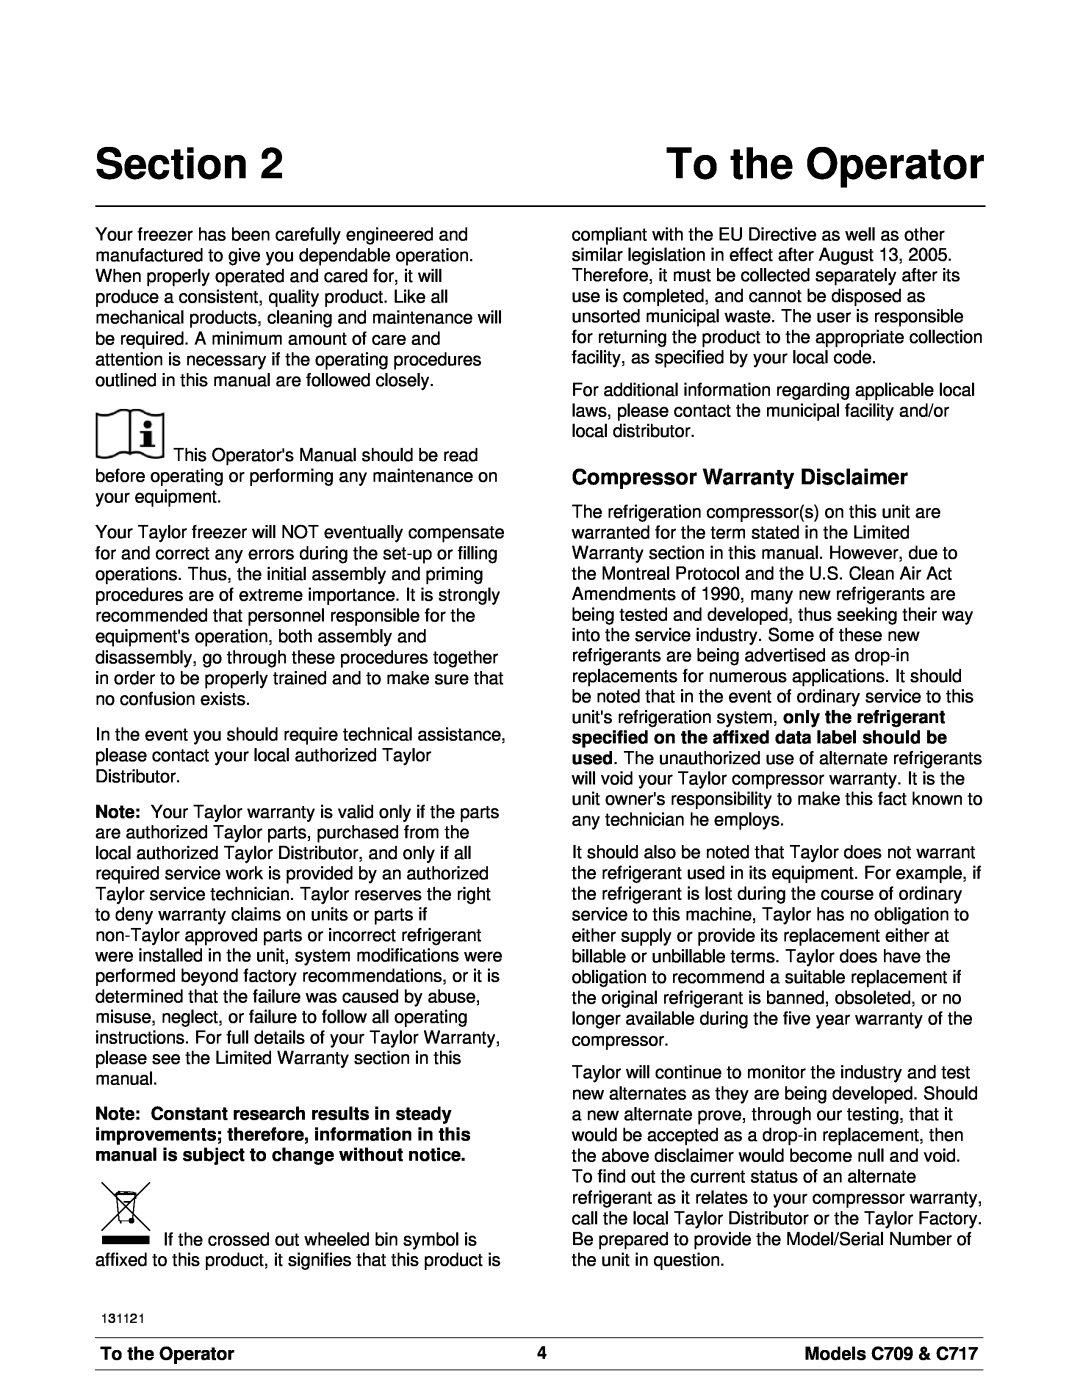 Taylor manual To the Operator, Section, Compressor Warranty Disclaimer, Models C709 & C717 